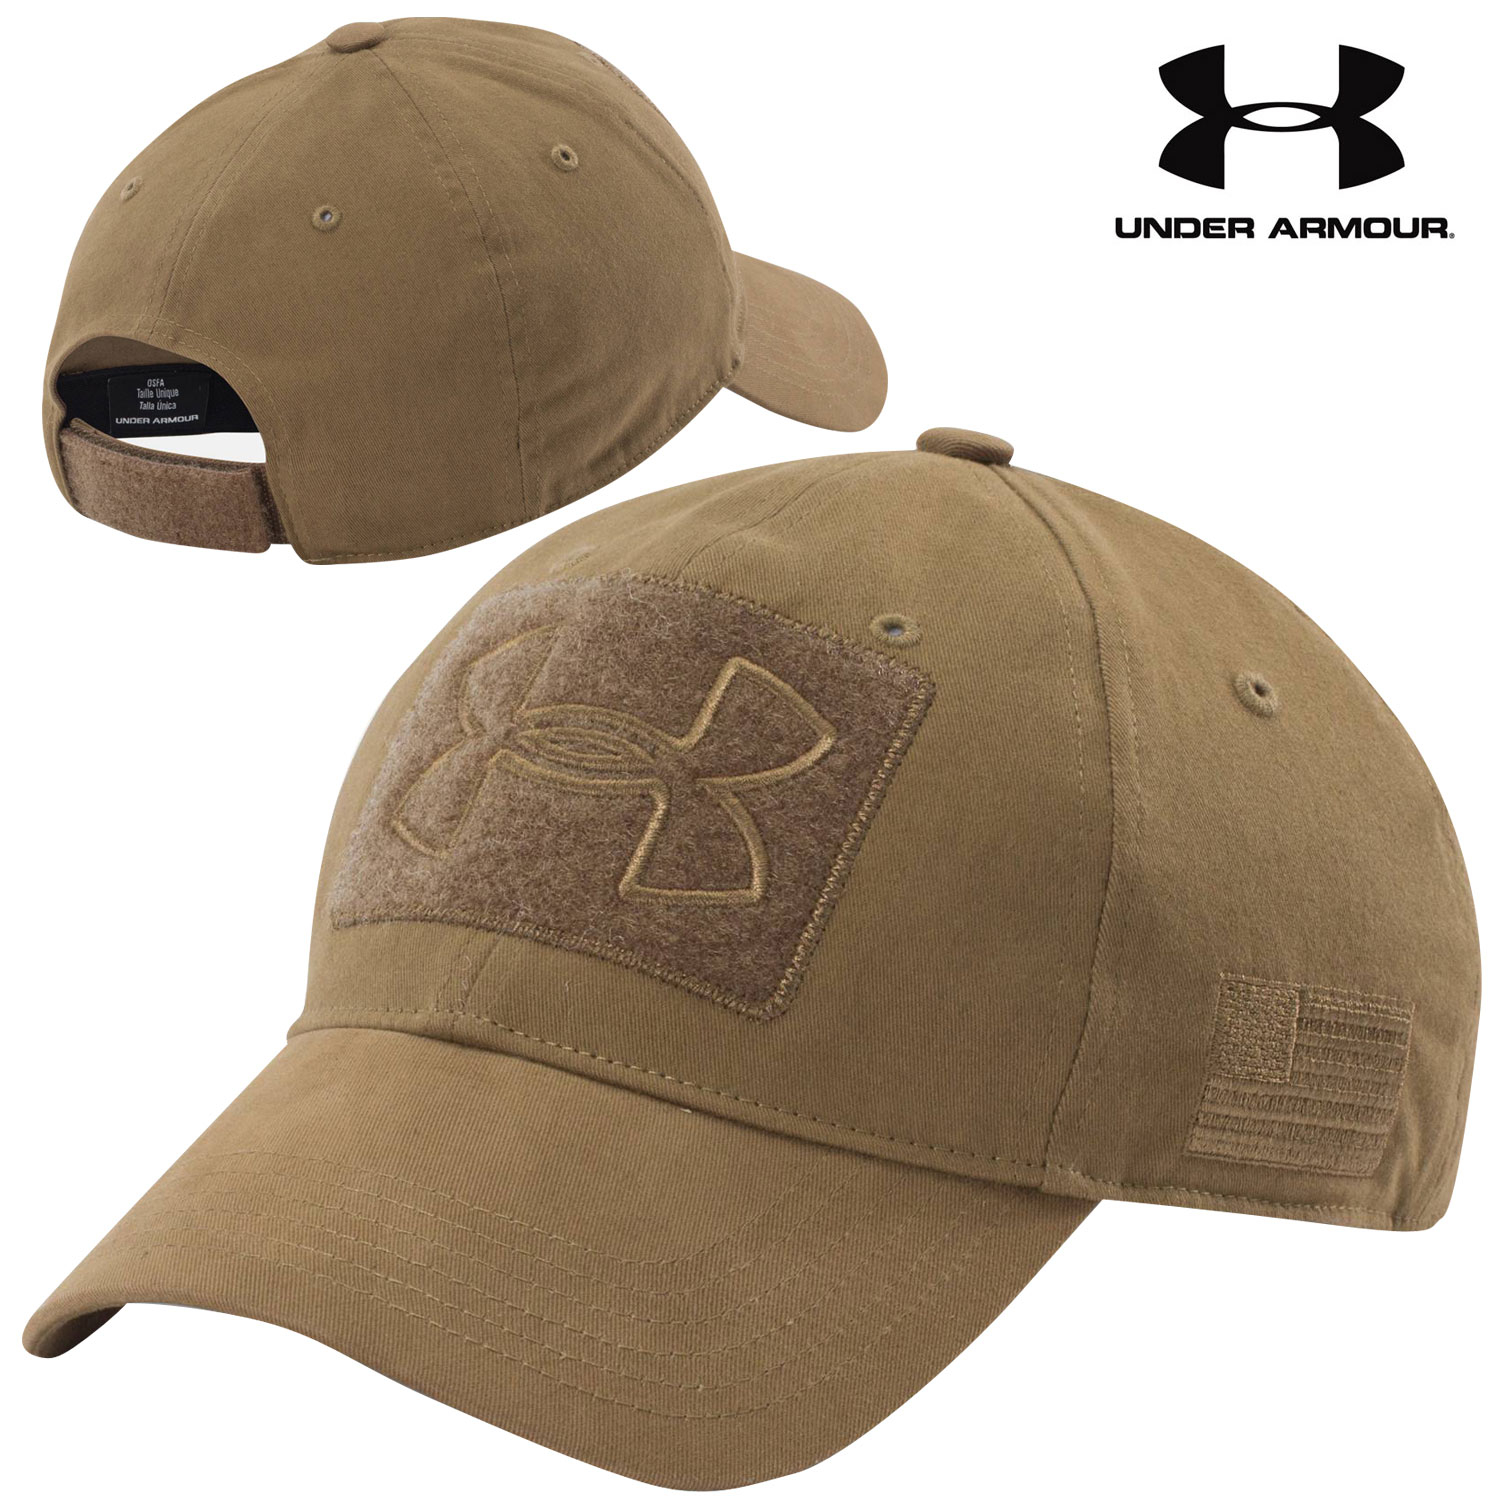 Under Armour Tactical Patch Cap- Coyote Brown